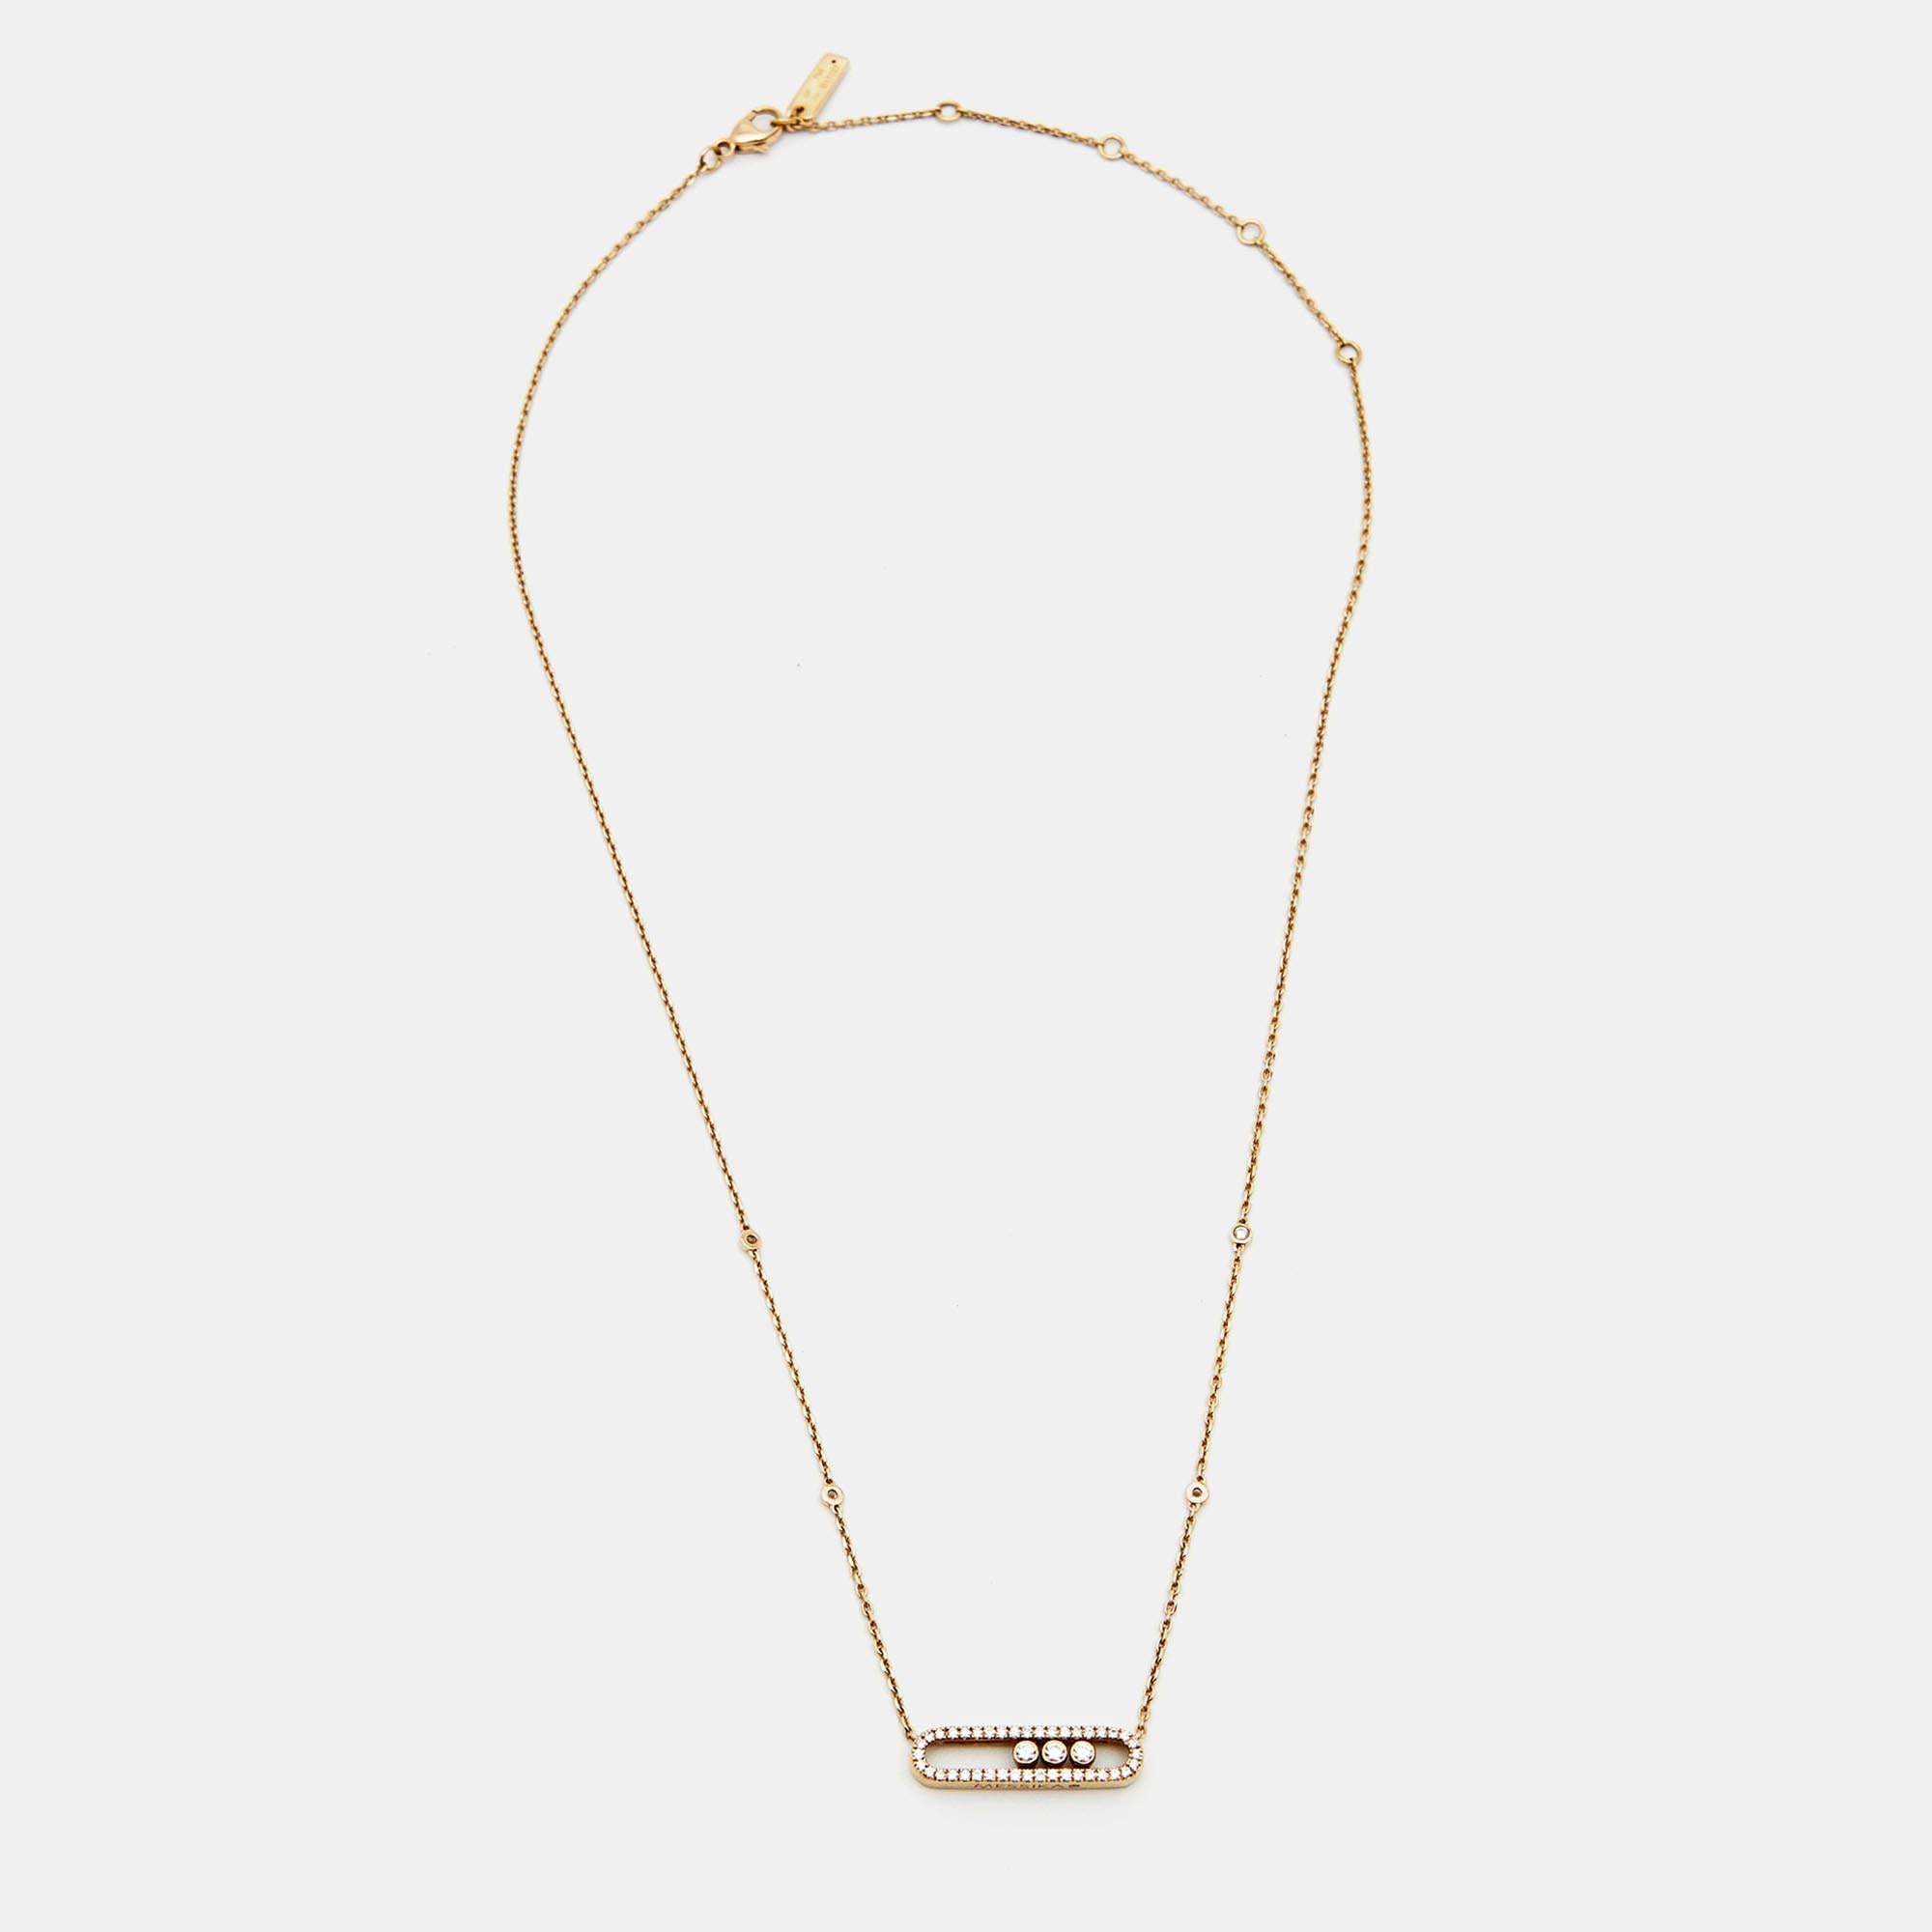 The Move collection has designs that are both wearable and timeless. This wondrous thing of beauty is the Baby Move necklace, handmade using 18k rose gold. It has a chain to hold the diamond-encrusted cage. Within the signature cage, three diamonds